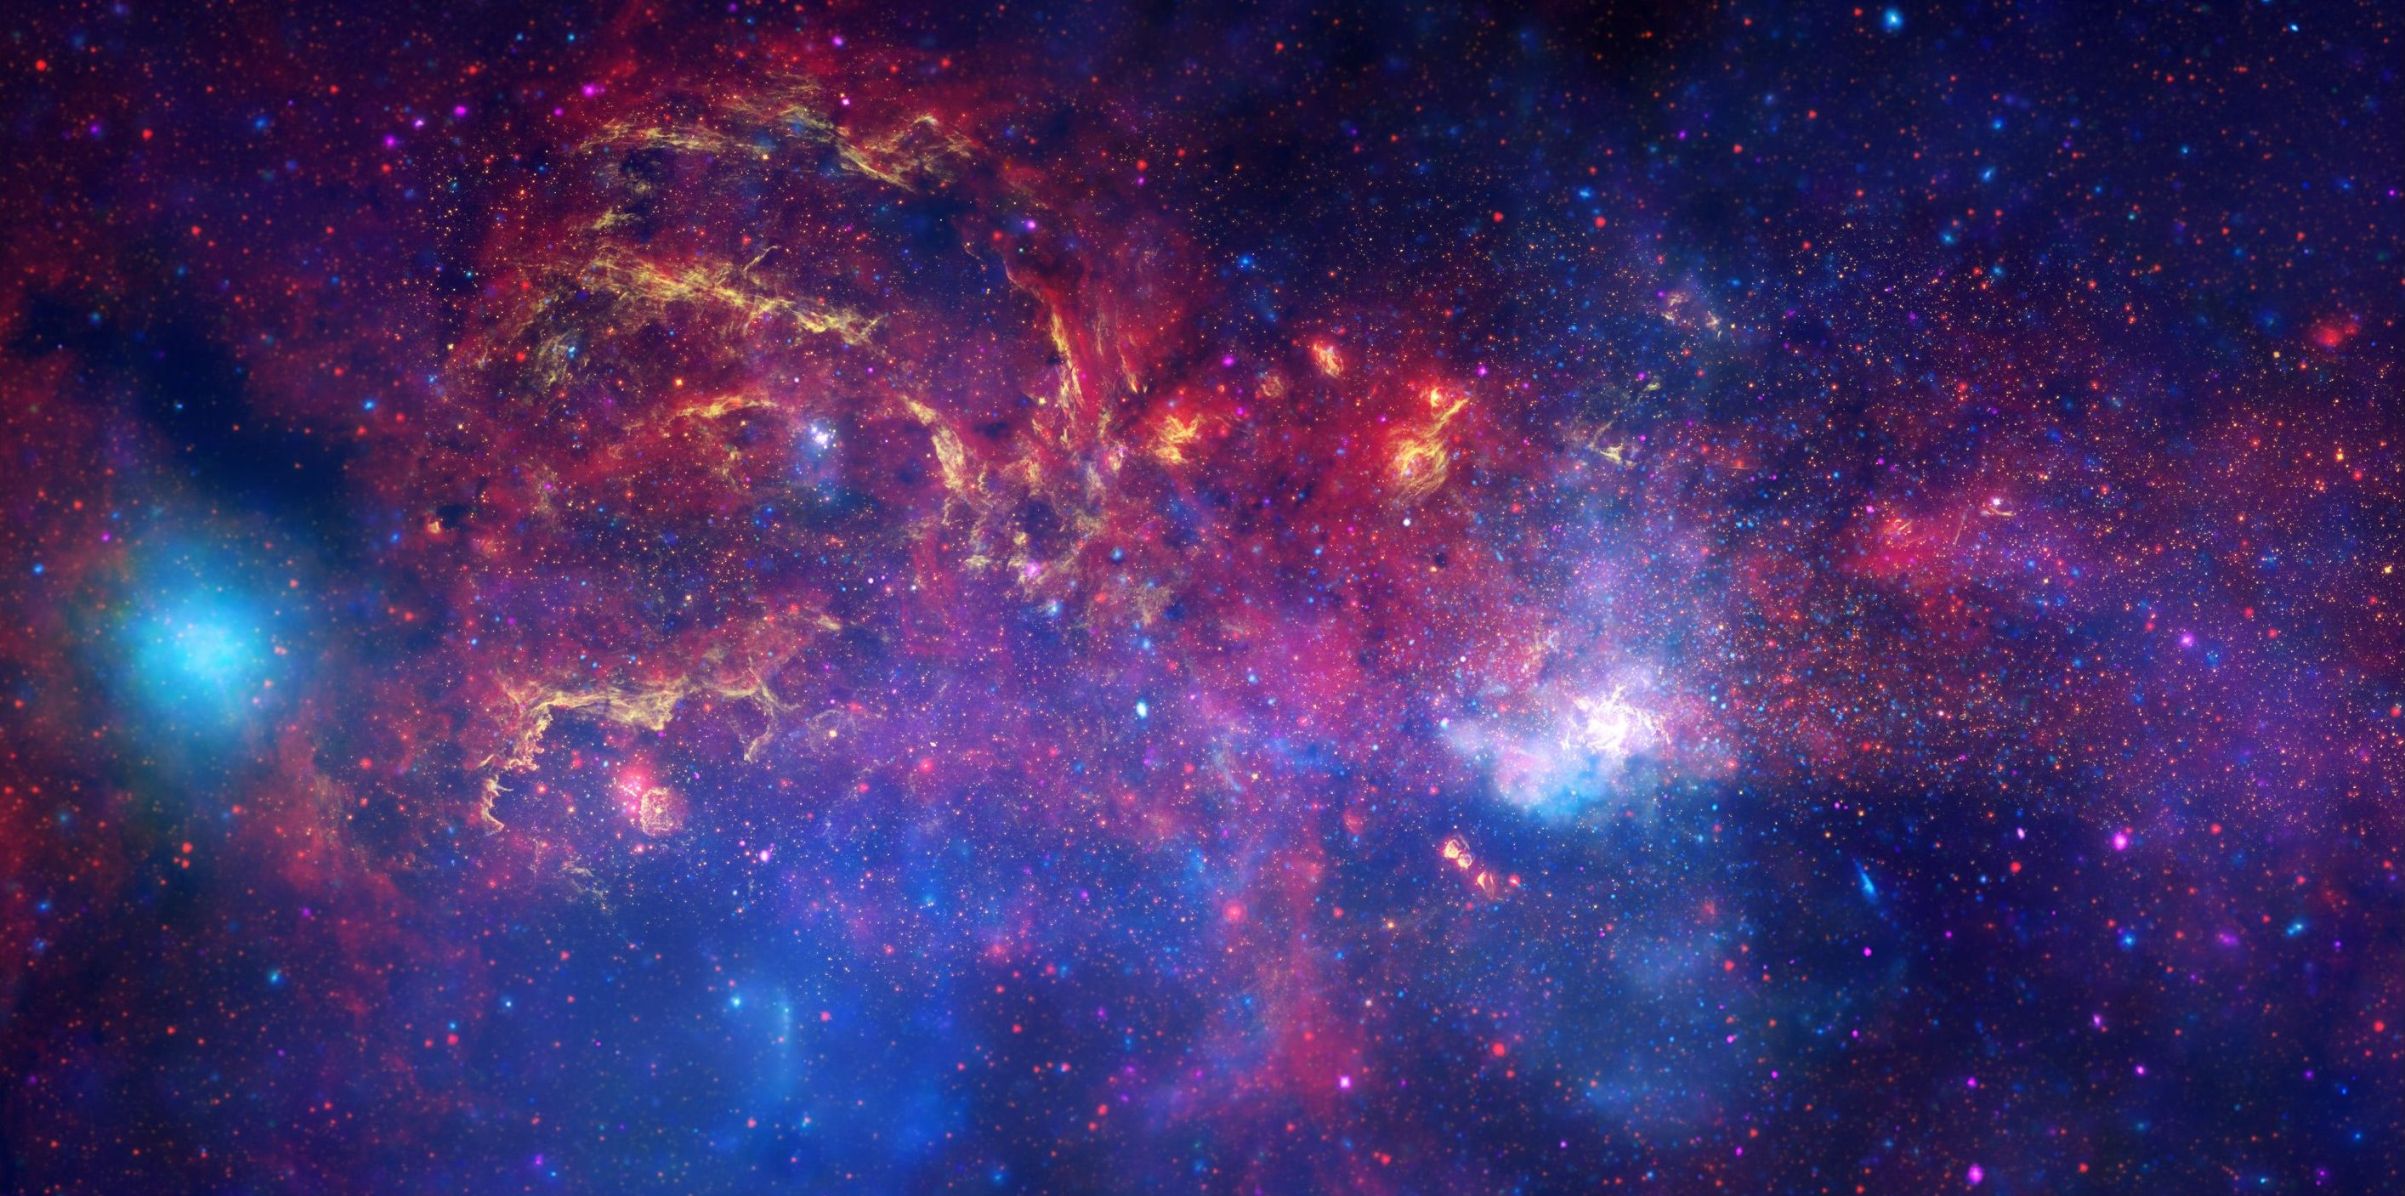 Multi-wavelength view of the center of the Milky Way galaxy